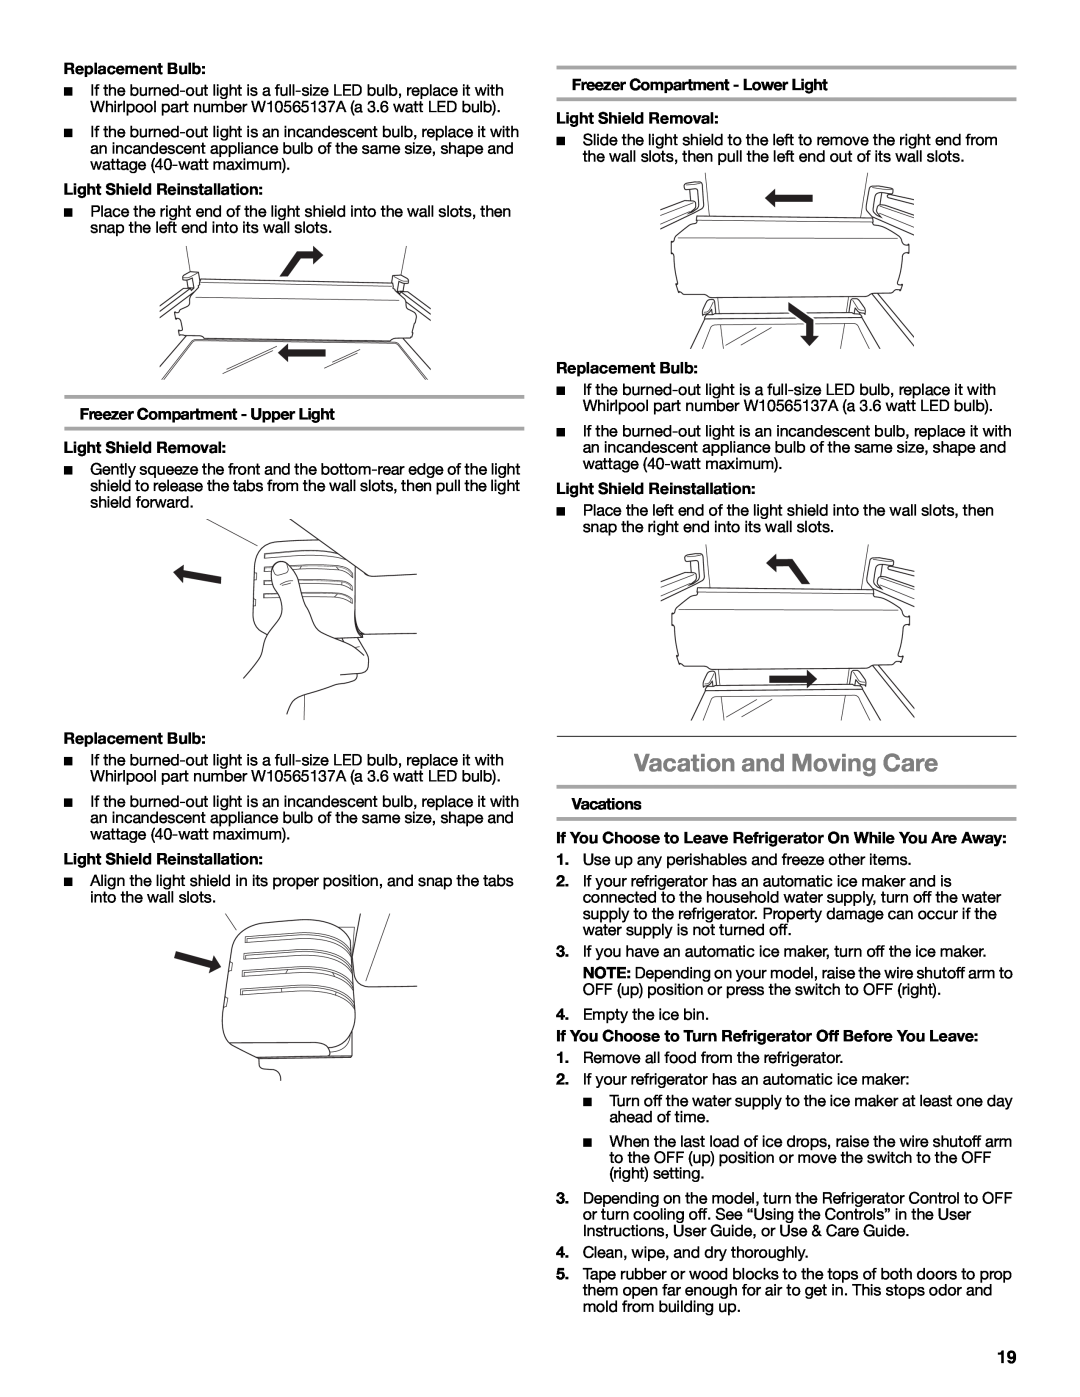 Whirlpool W10632883A installation instructions Vacation and Moving Care 